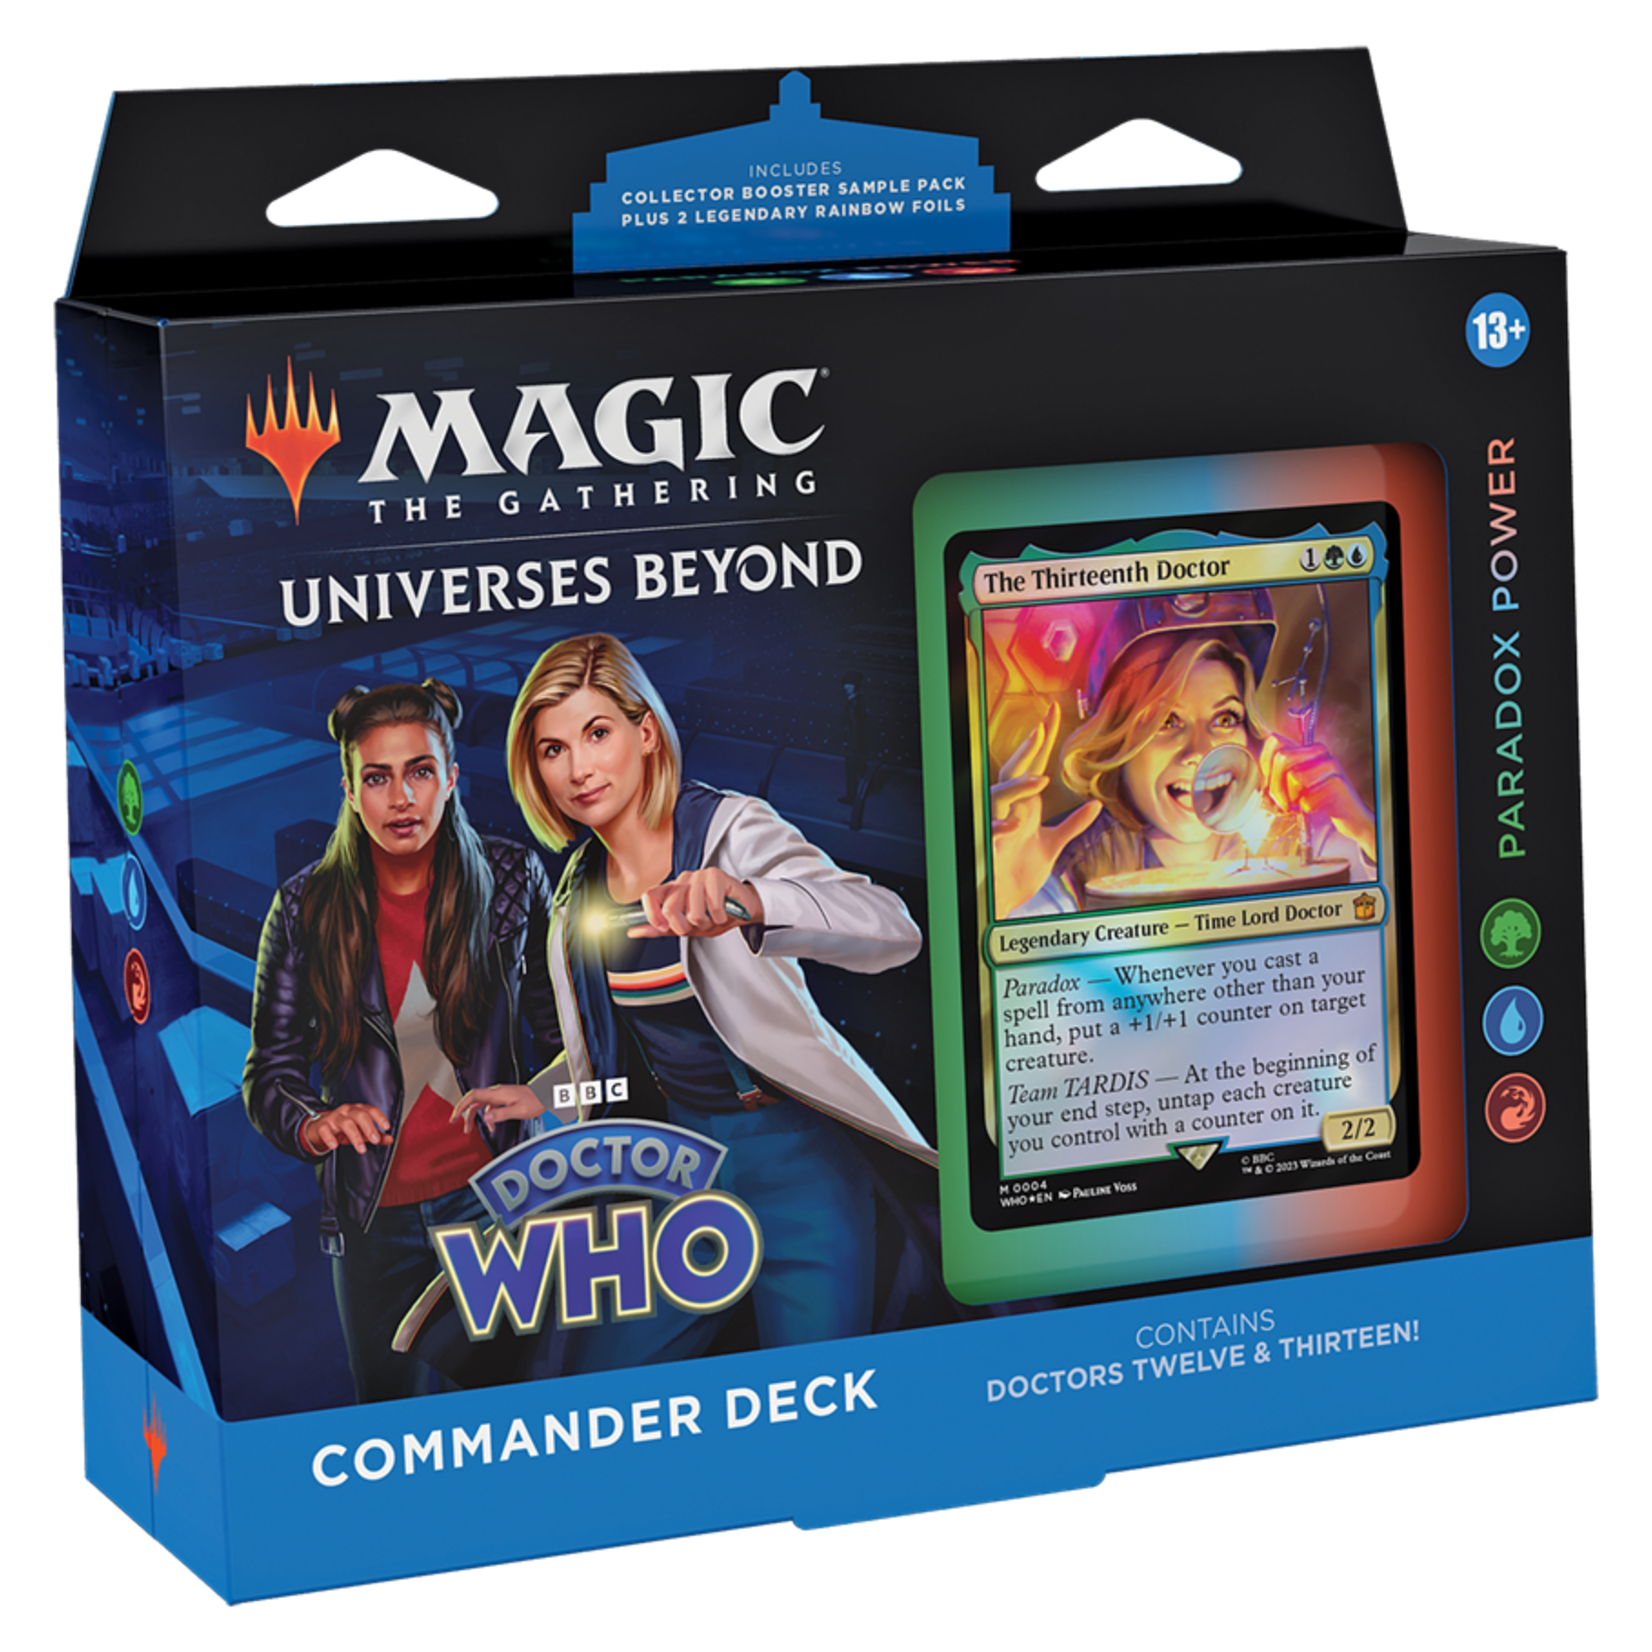 Wizards of the Coast Magic - Doctor Who Commander Deck "Paradox Power" (URG)